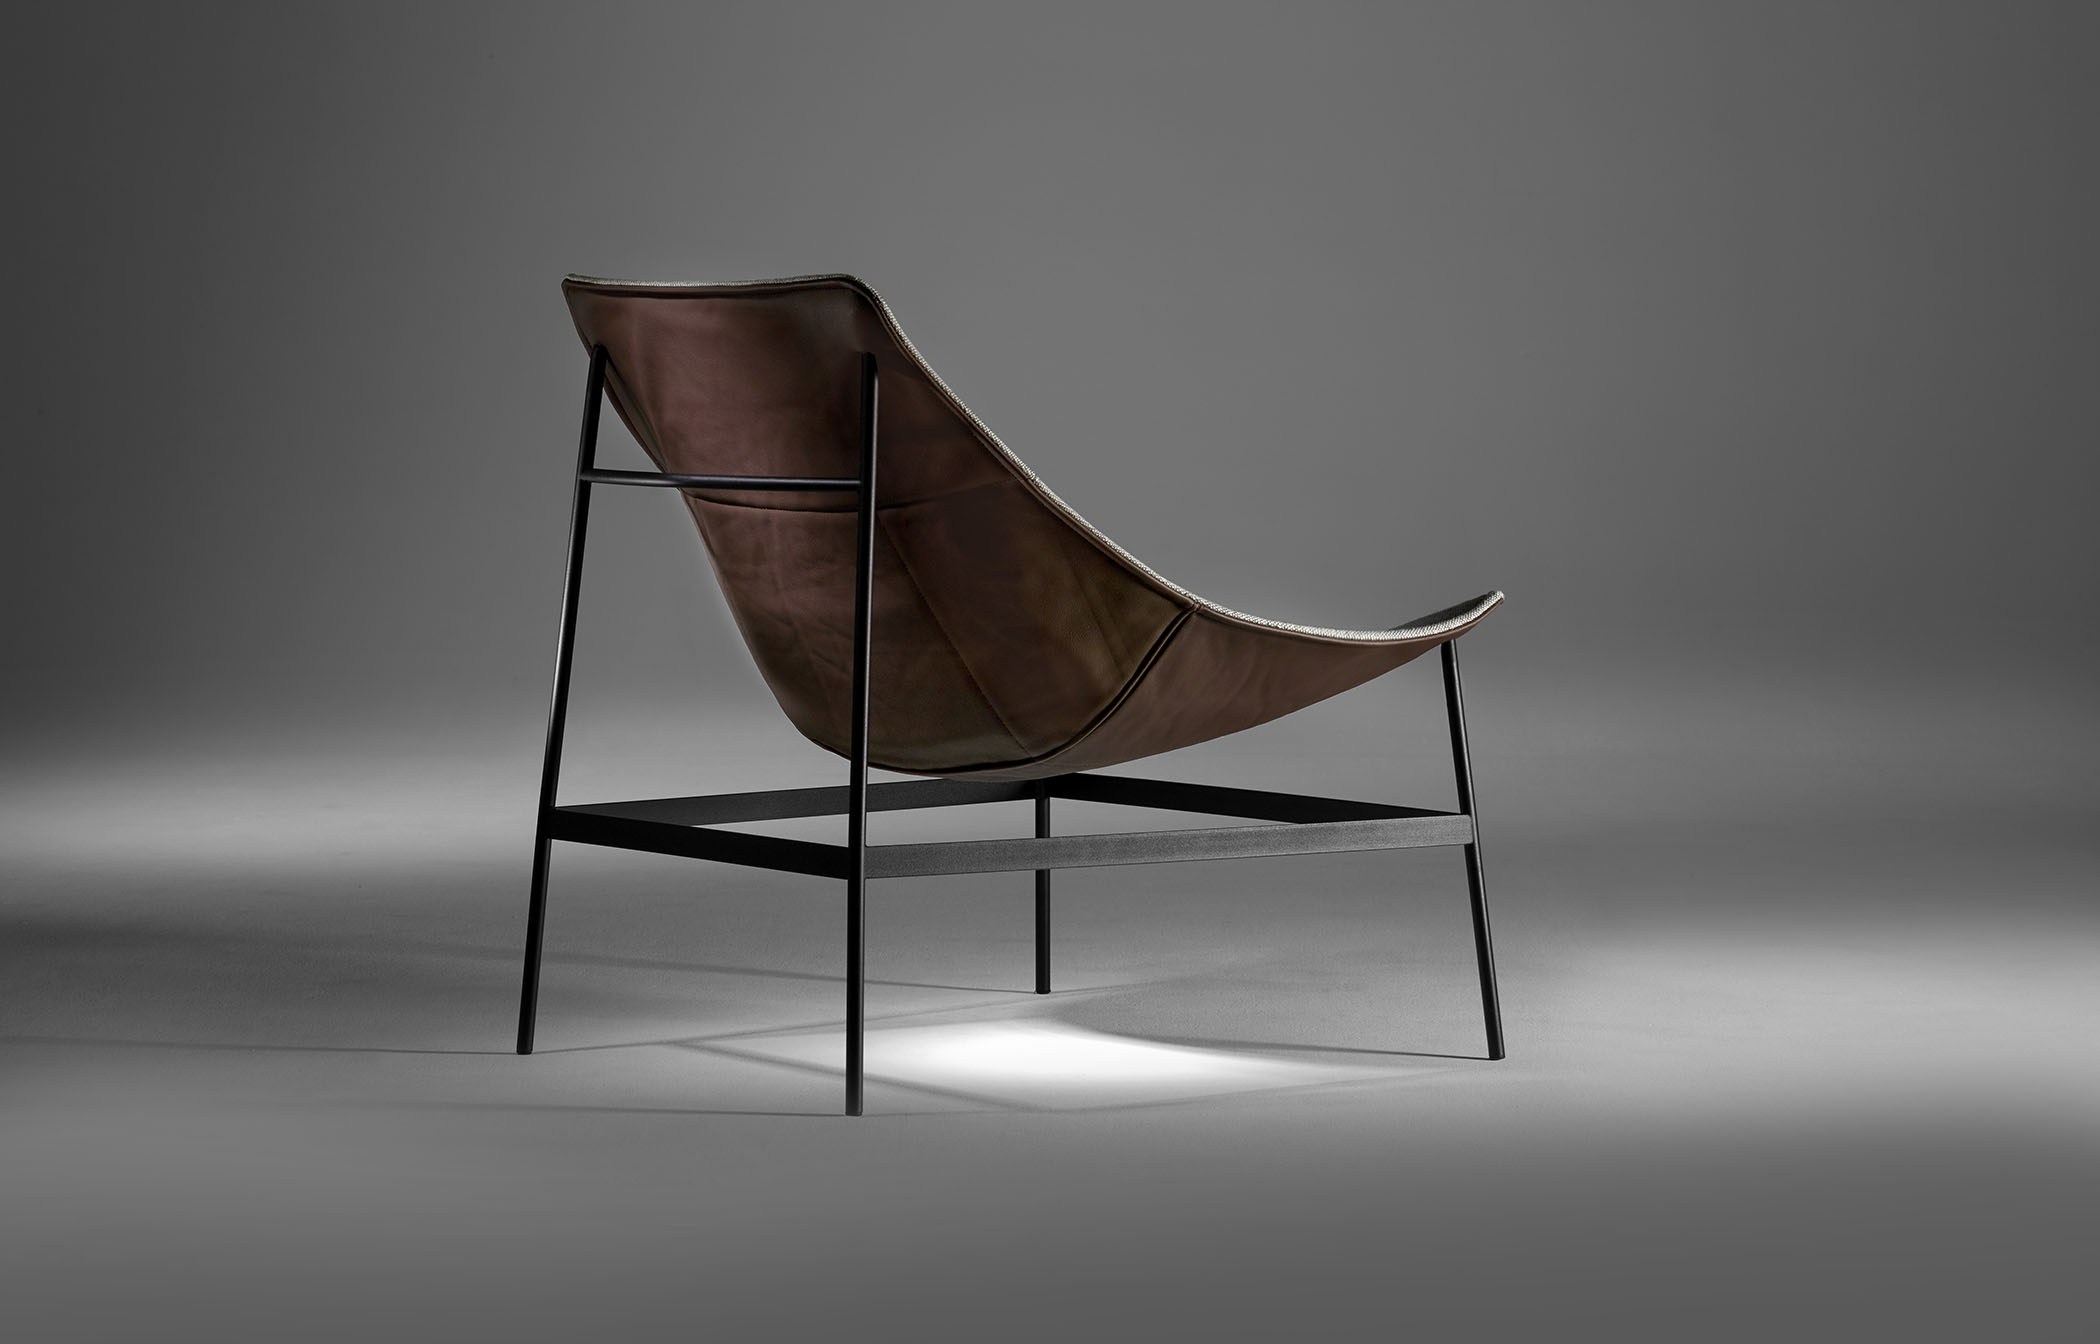 Montparnasse Lounge Chair by Christophe Pillet for Offecct